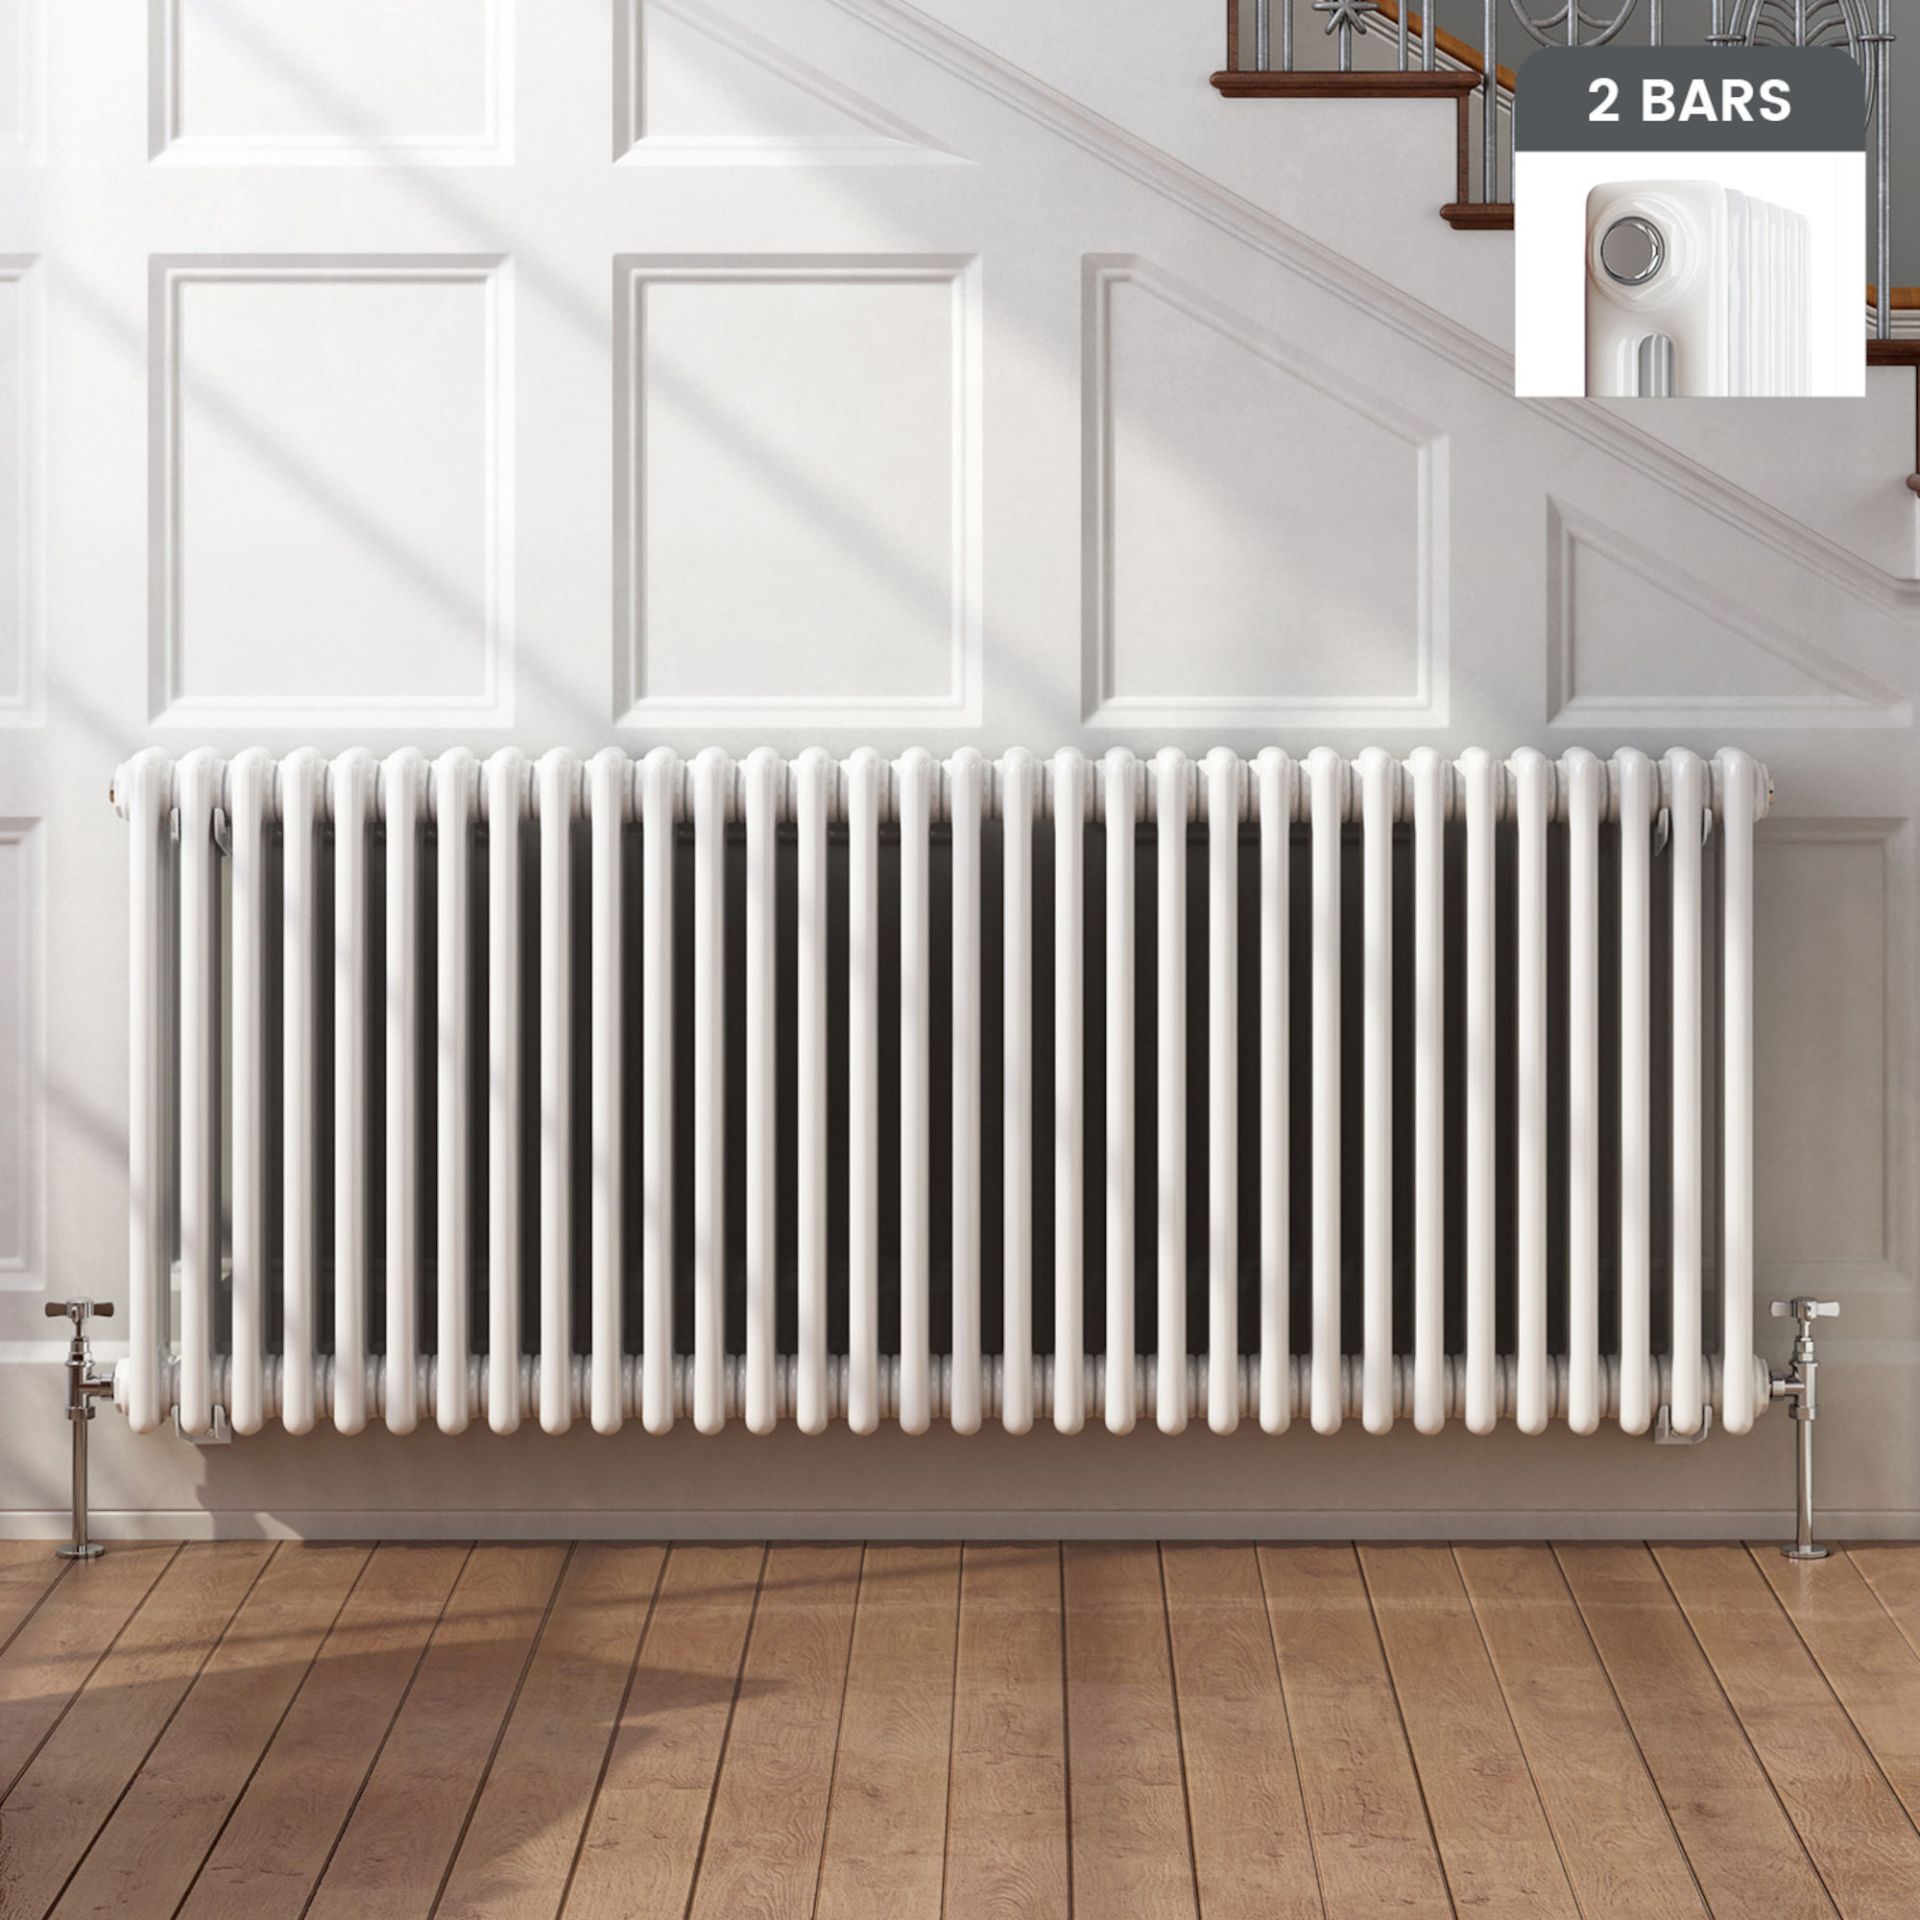 (PT7) 600x1458mm White Double Panel Horizontal Colosseum Traditional Radiator. RRP £569.99. Made